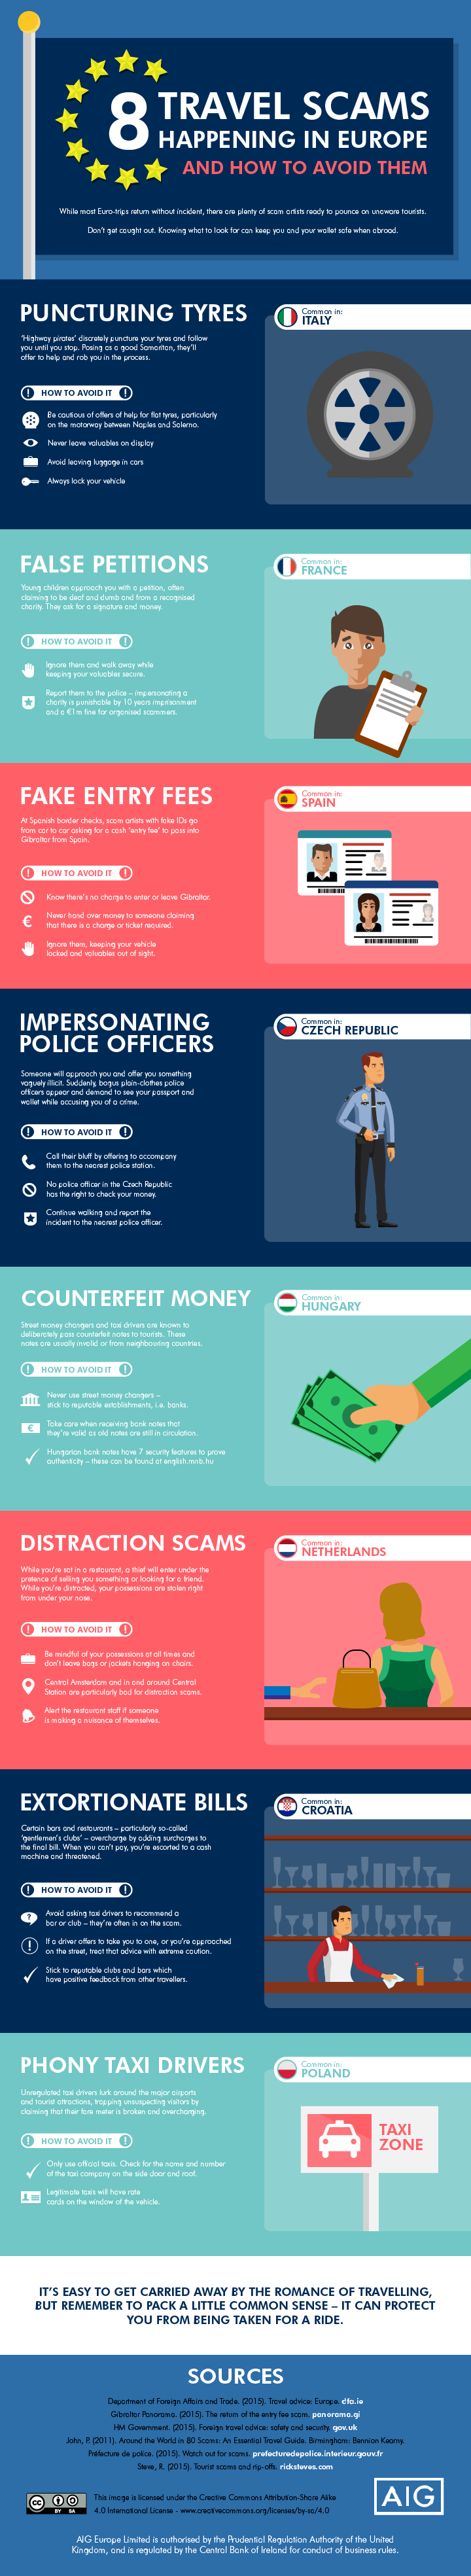  8 travel scams infographic